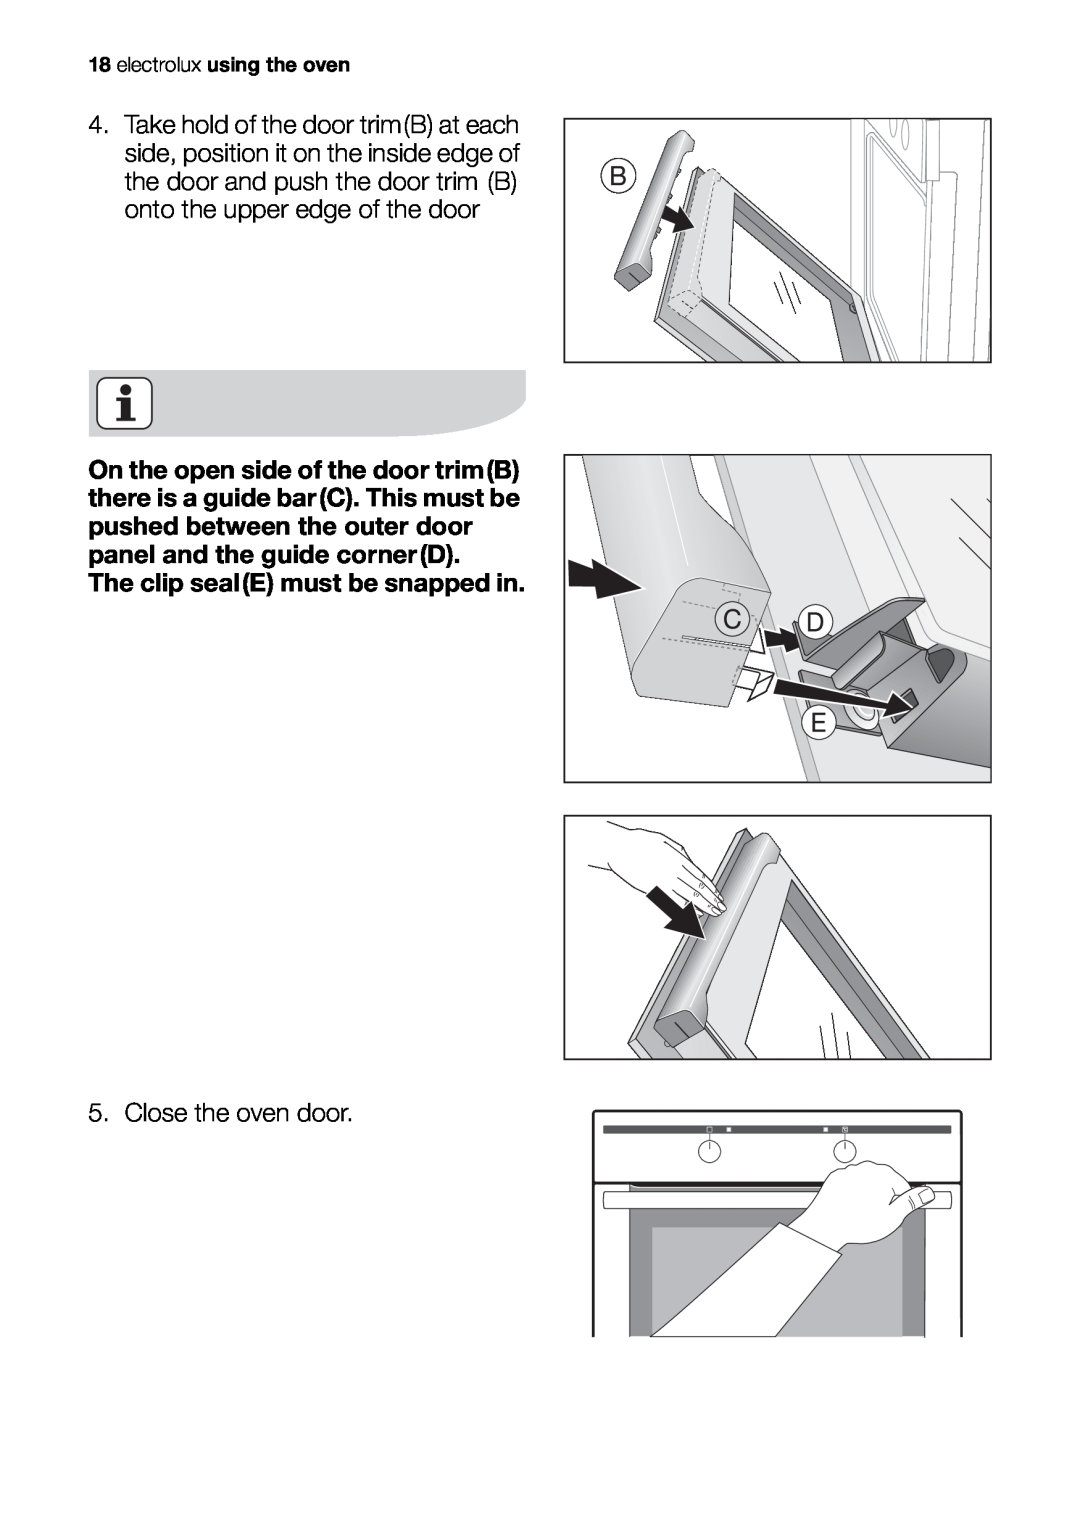 Electrolux EOB20001 user manual The clip sealE must be snapped in 5. Close the oven door, electrolux using the oven 